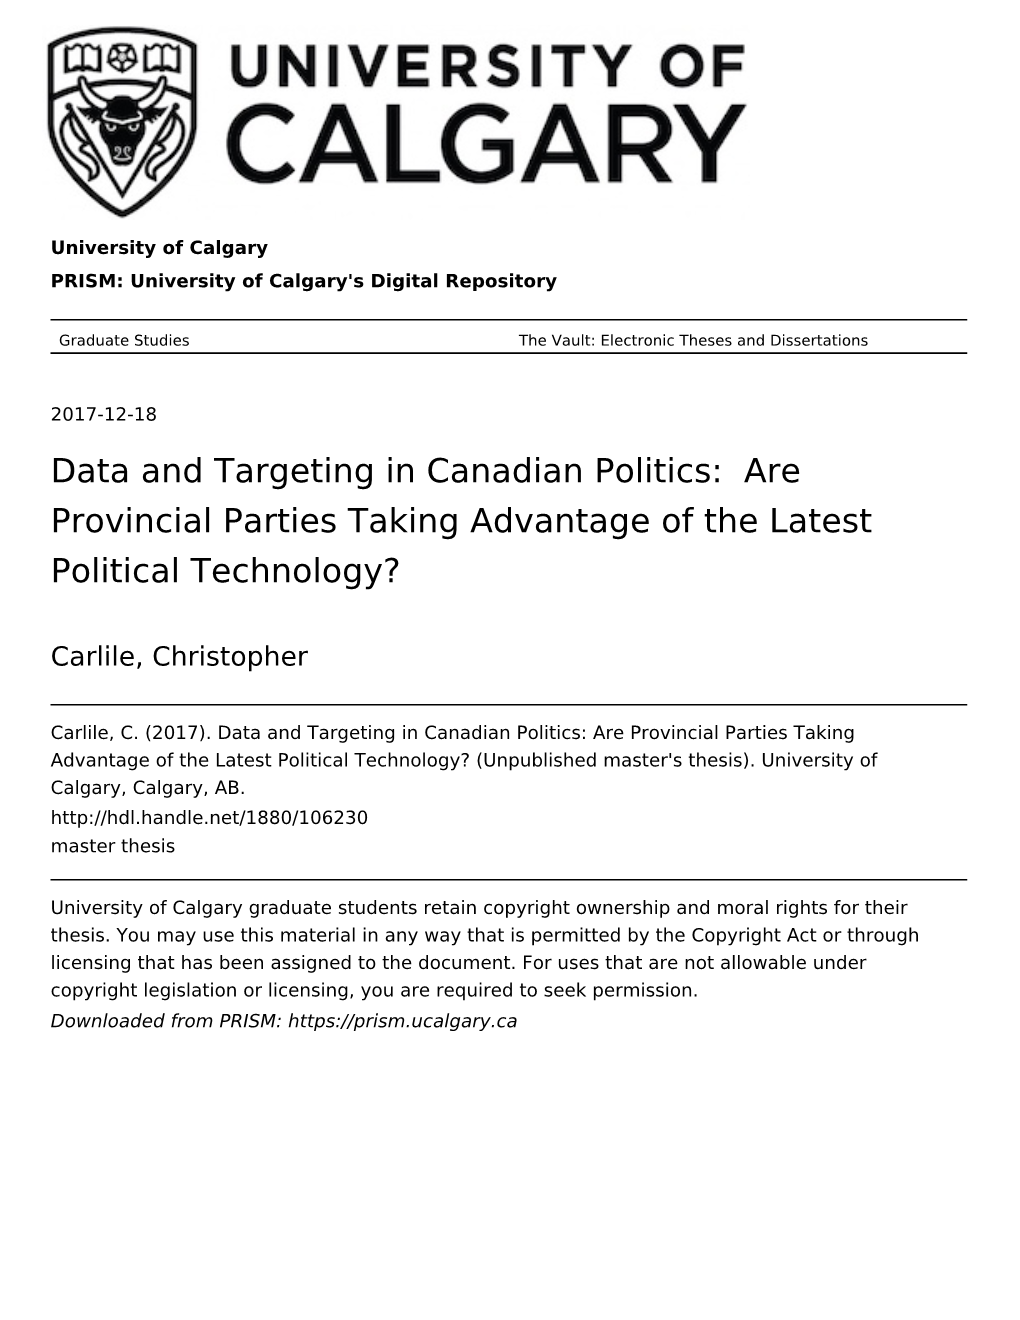 Data and Targeting in Canadian Politics: Are Provincial Parties Taking Advantage of the Latest Political Technology?